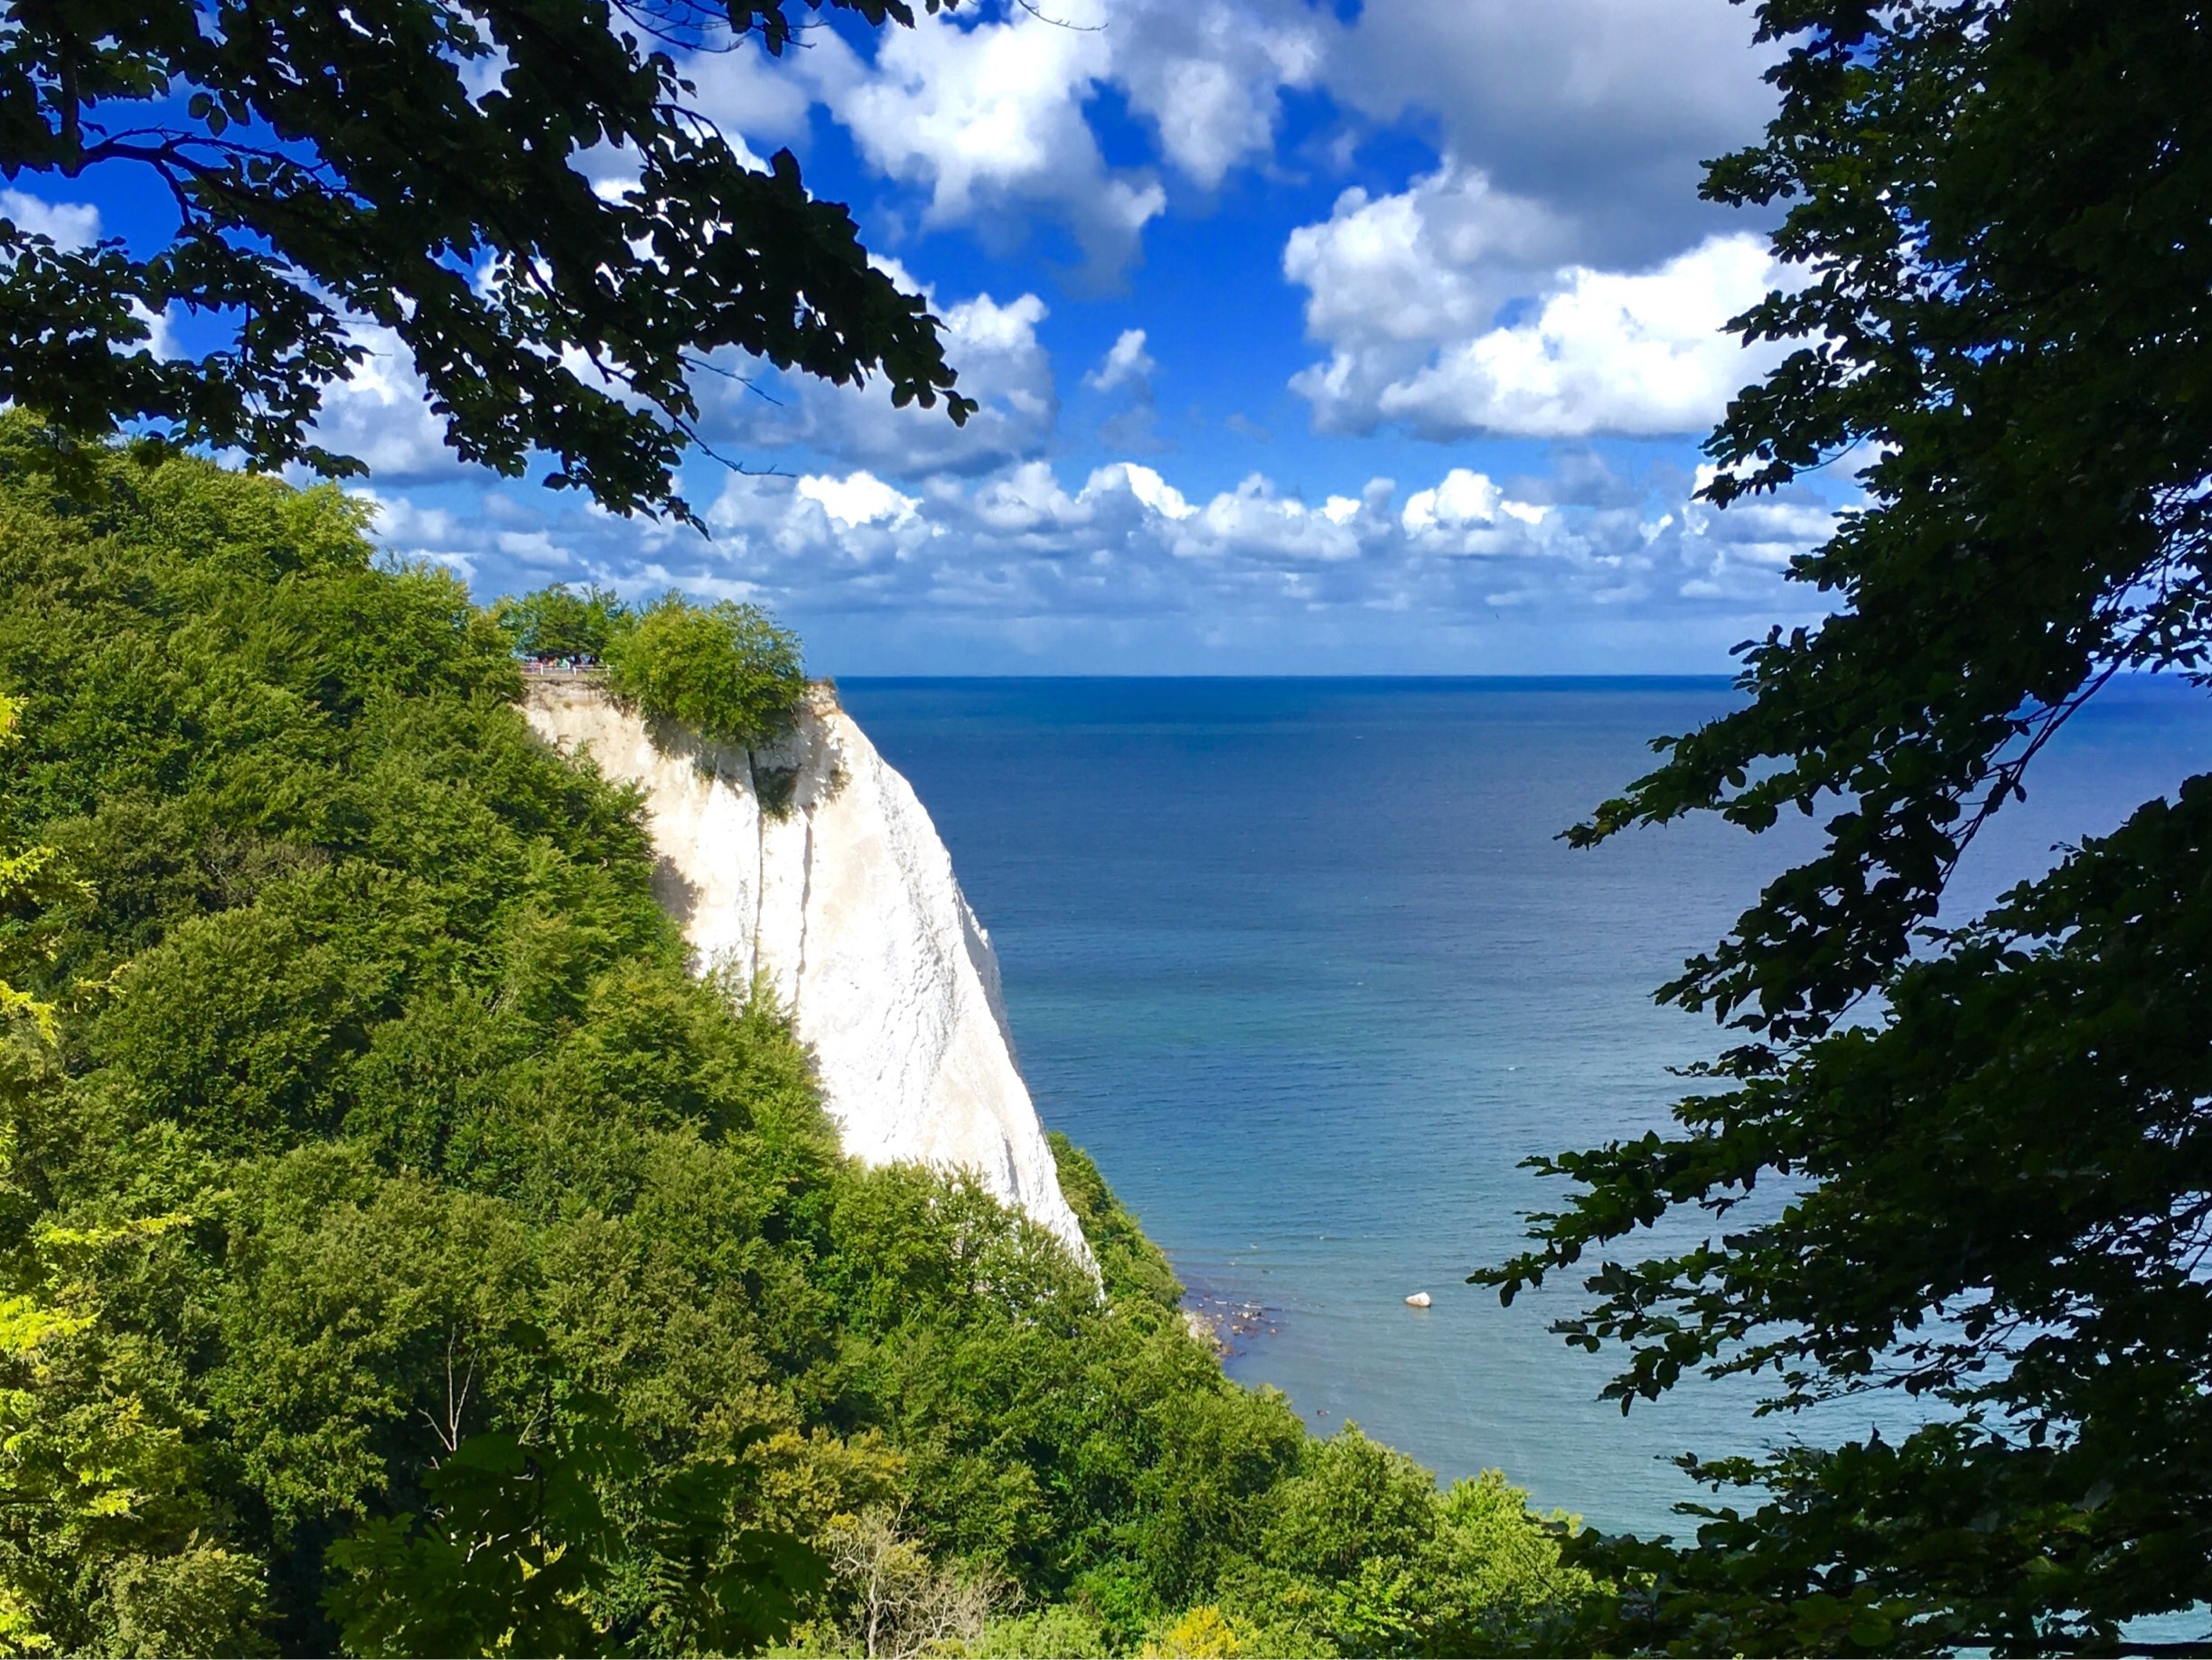 The King's Chair (Königsstuhl) is the highest chalk cliff on the Stubbenkammer (118m) in the Jasmund National Park on the island of Rügen, Baltic Sea
#green
